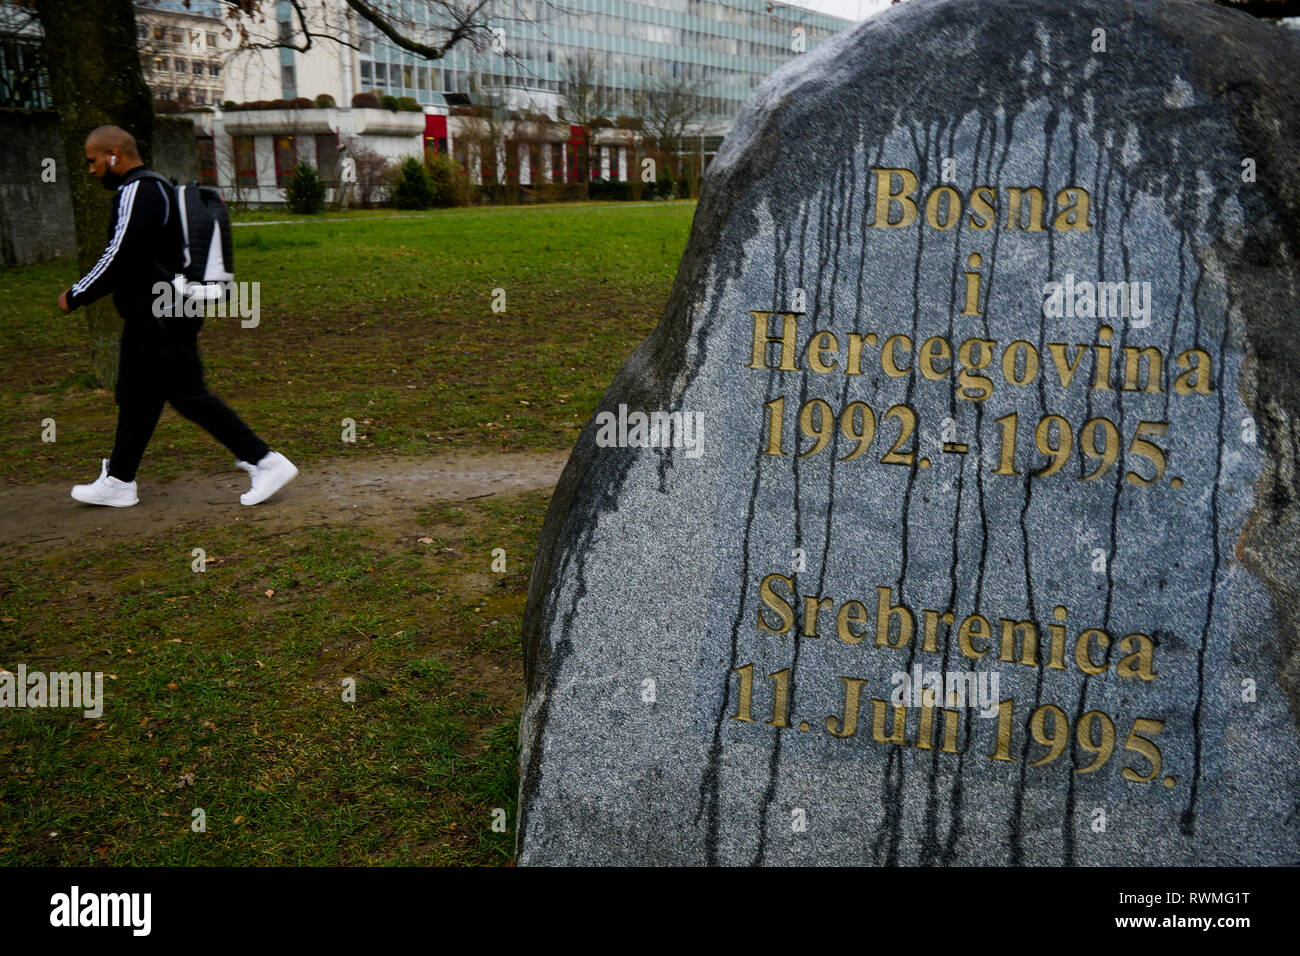 Homage to the victims of war in Bosna, Place des Nations,Geneva, Swiss Stock Photo